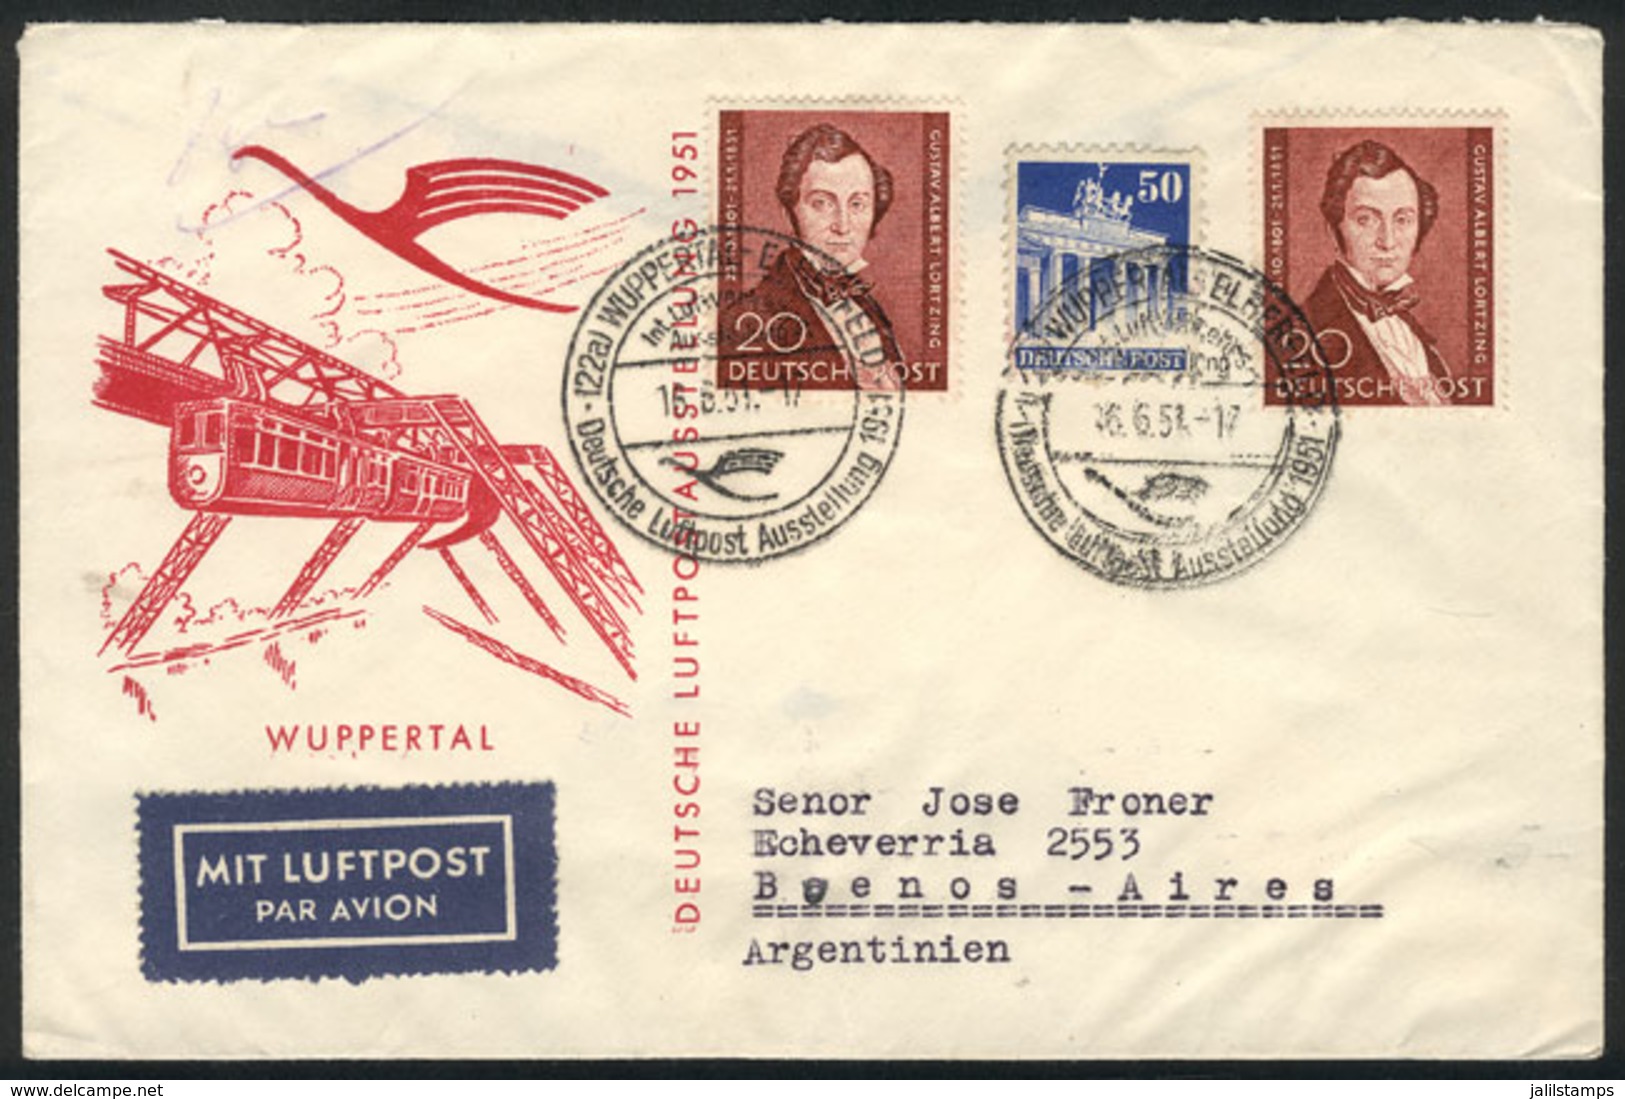 WEST GERMANY: Airmail Cover Sent To Argentina On 16/JUN/1951 With Very Good Postage, Excellent Quality! - Lettres & Documents